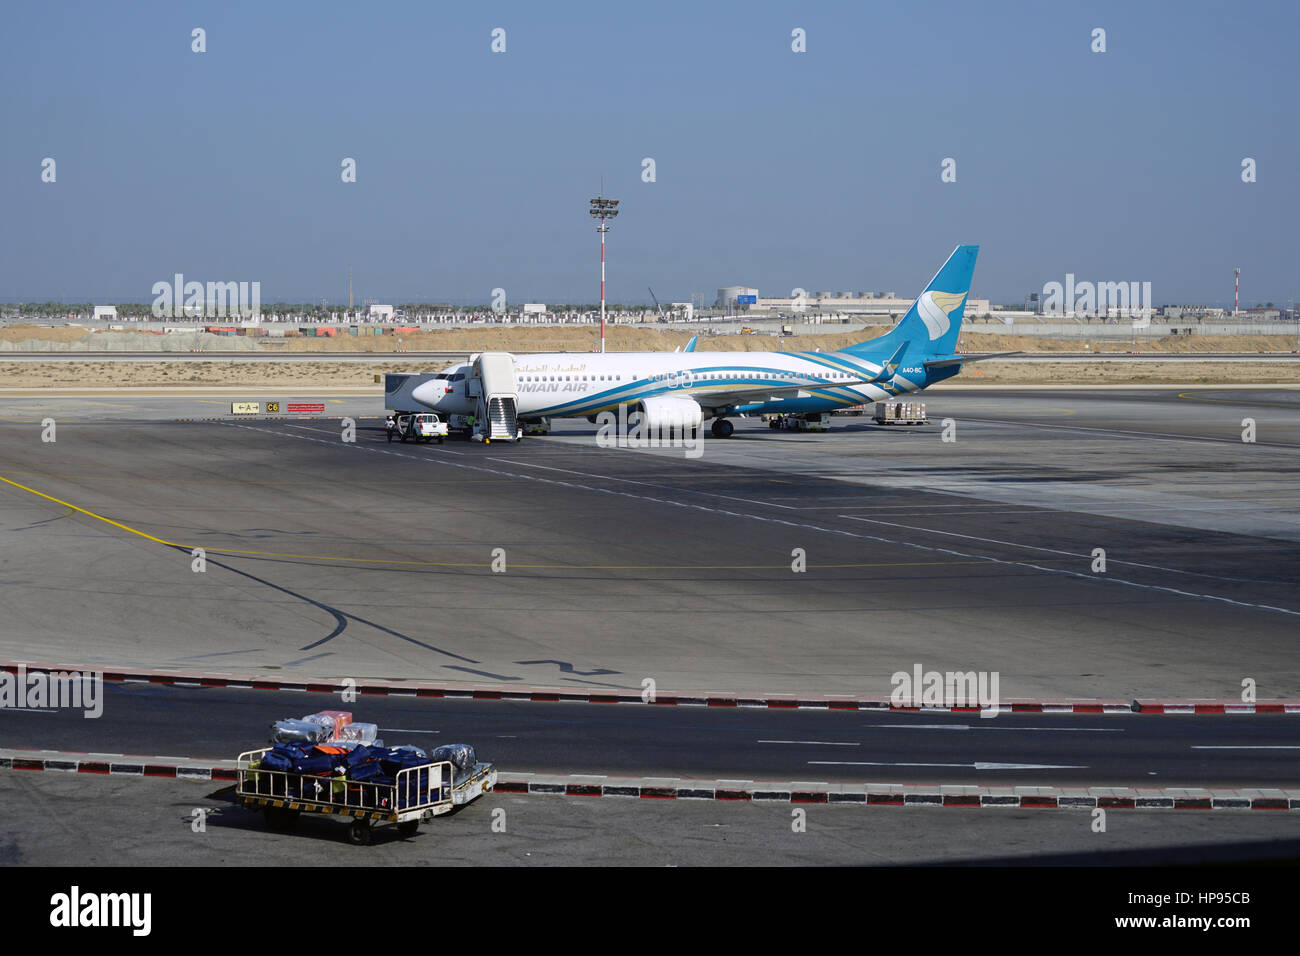 View of the Muscat International Airport (MCT), formerly Seeb International Airport. It is the main airport in Oman and the hub for Oman Air. Stock Photo